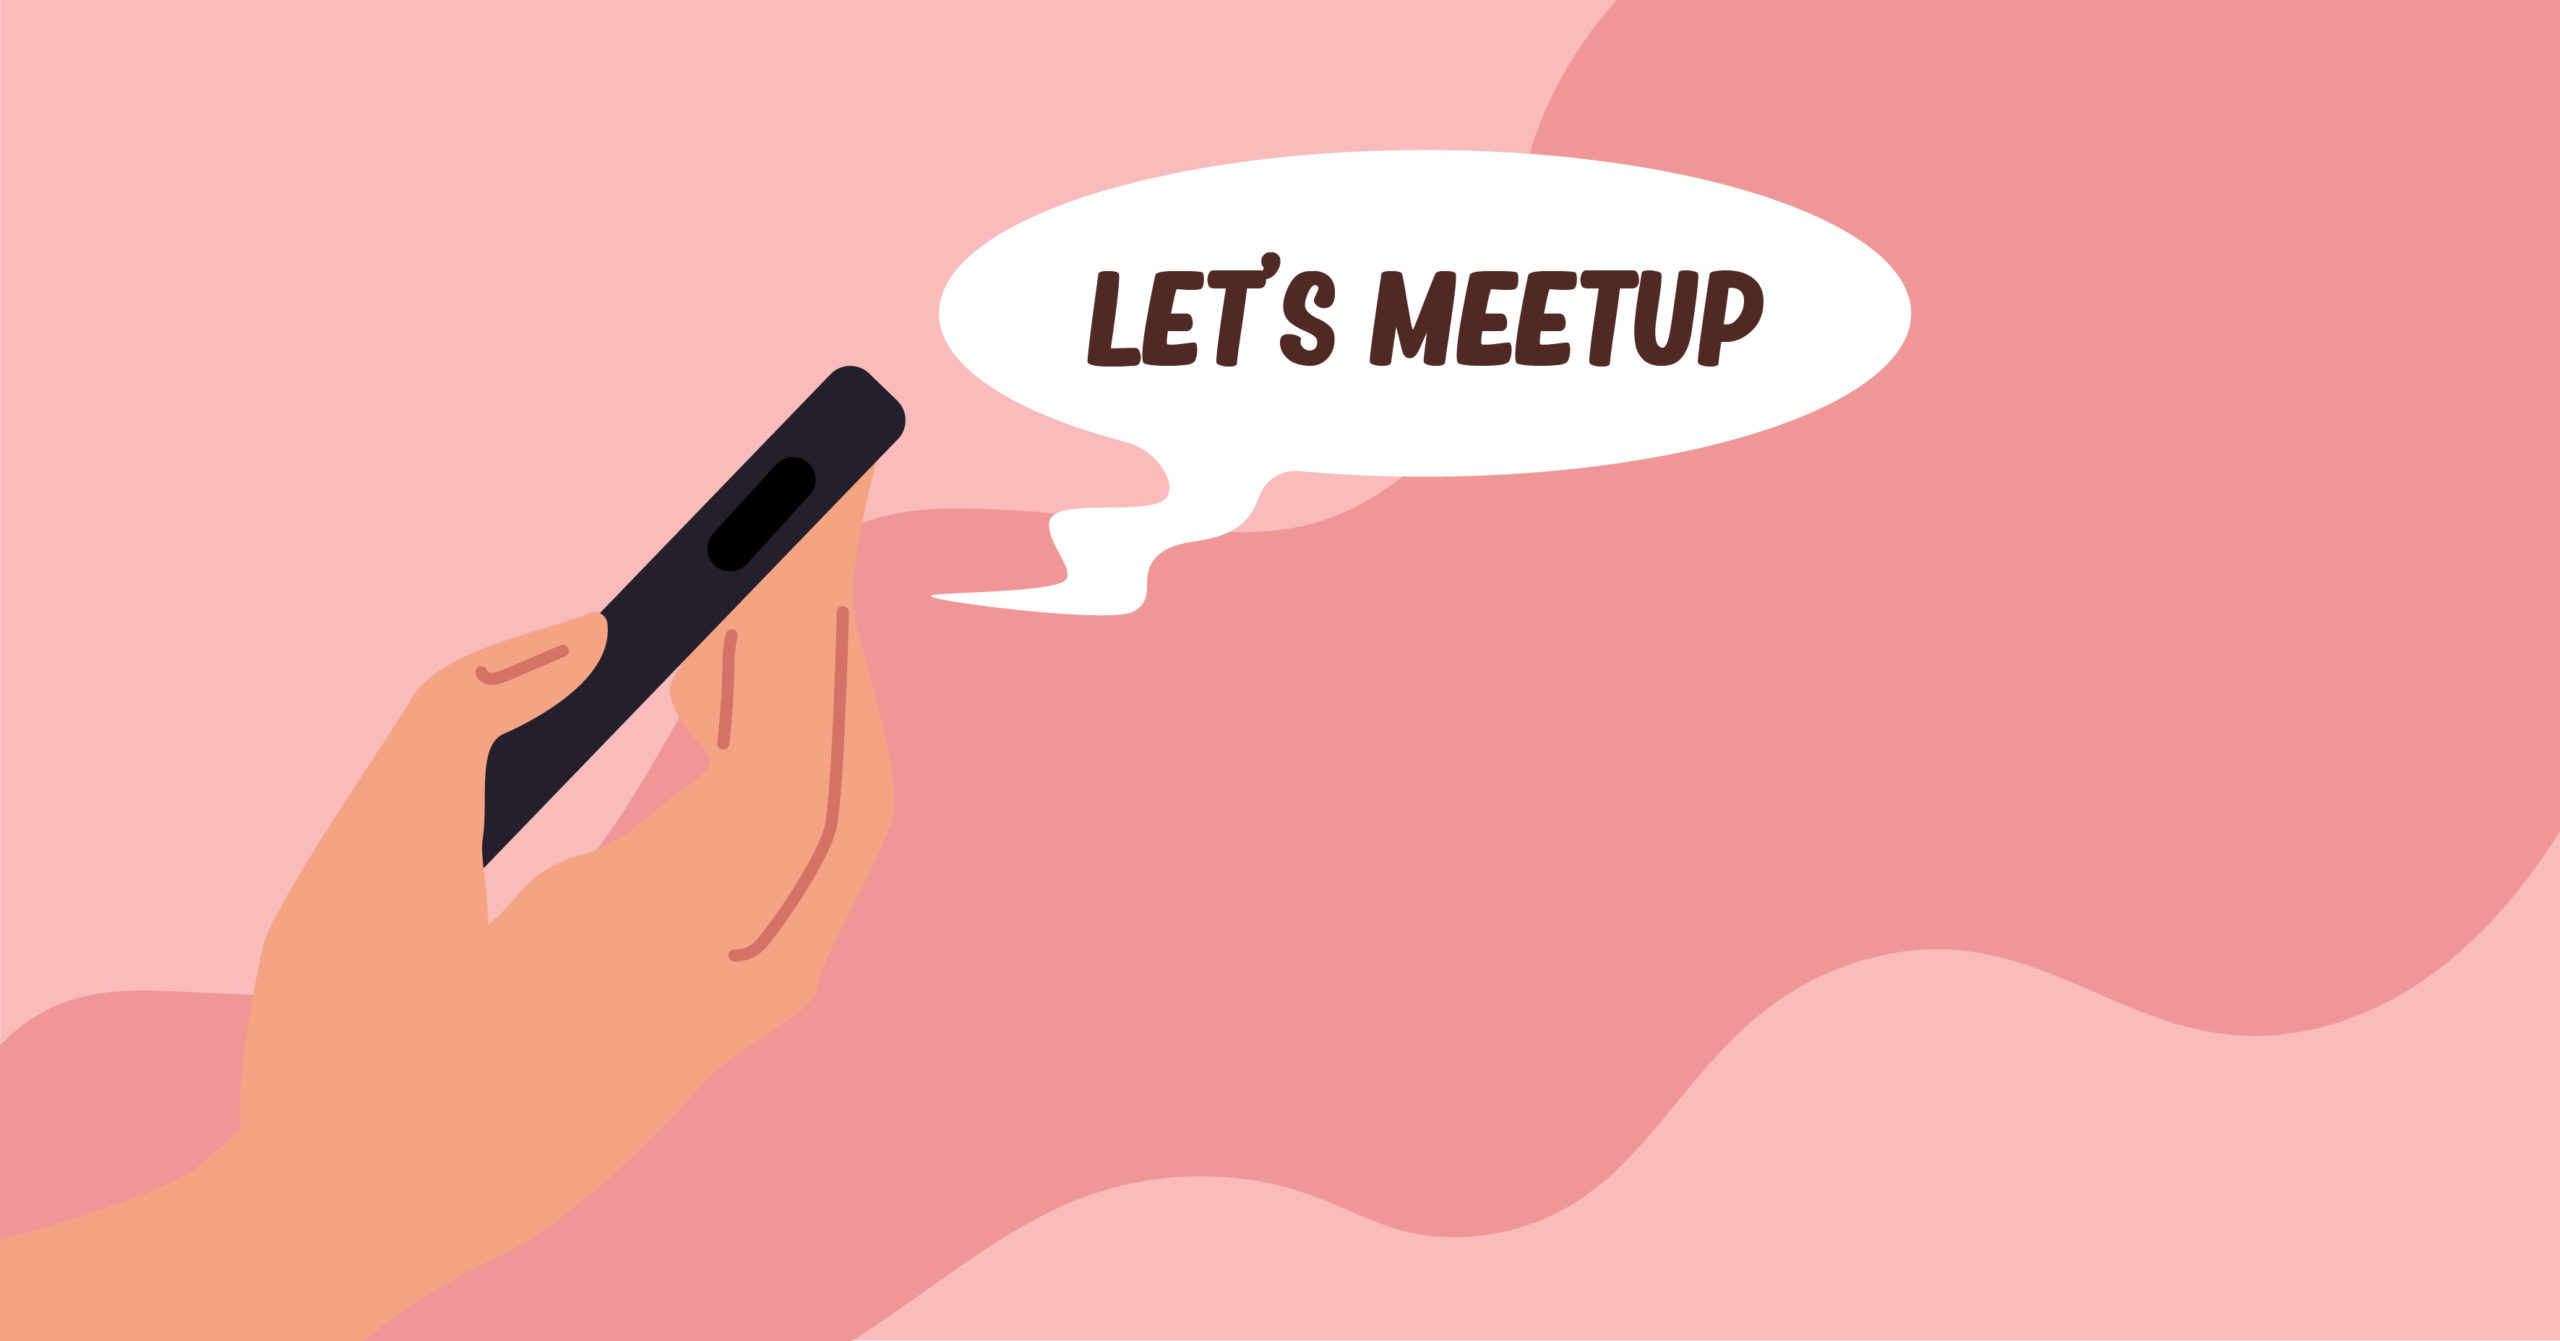 Text messages should only be about your next meetups